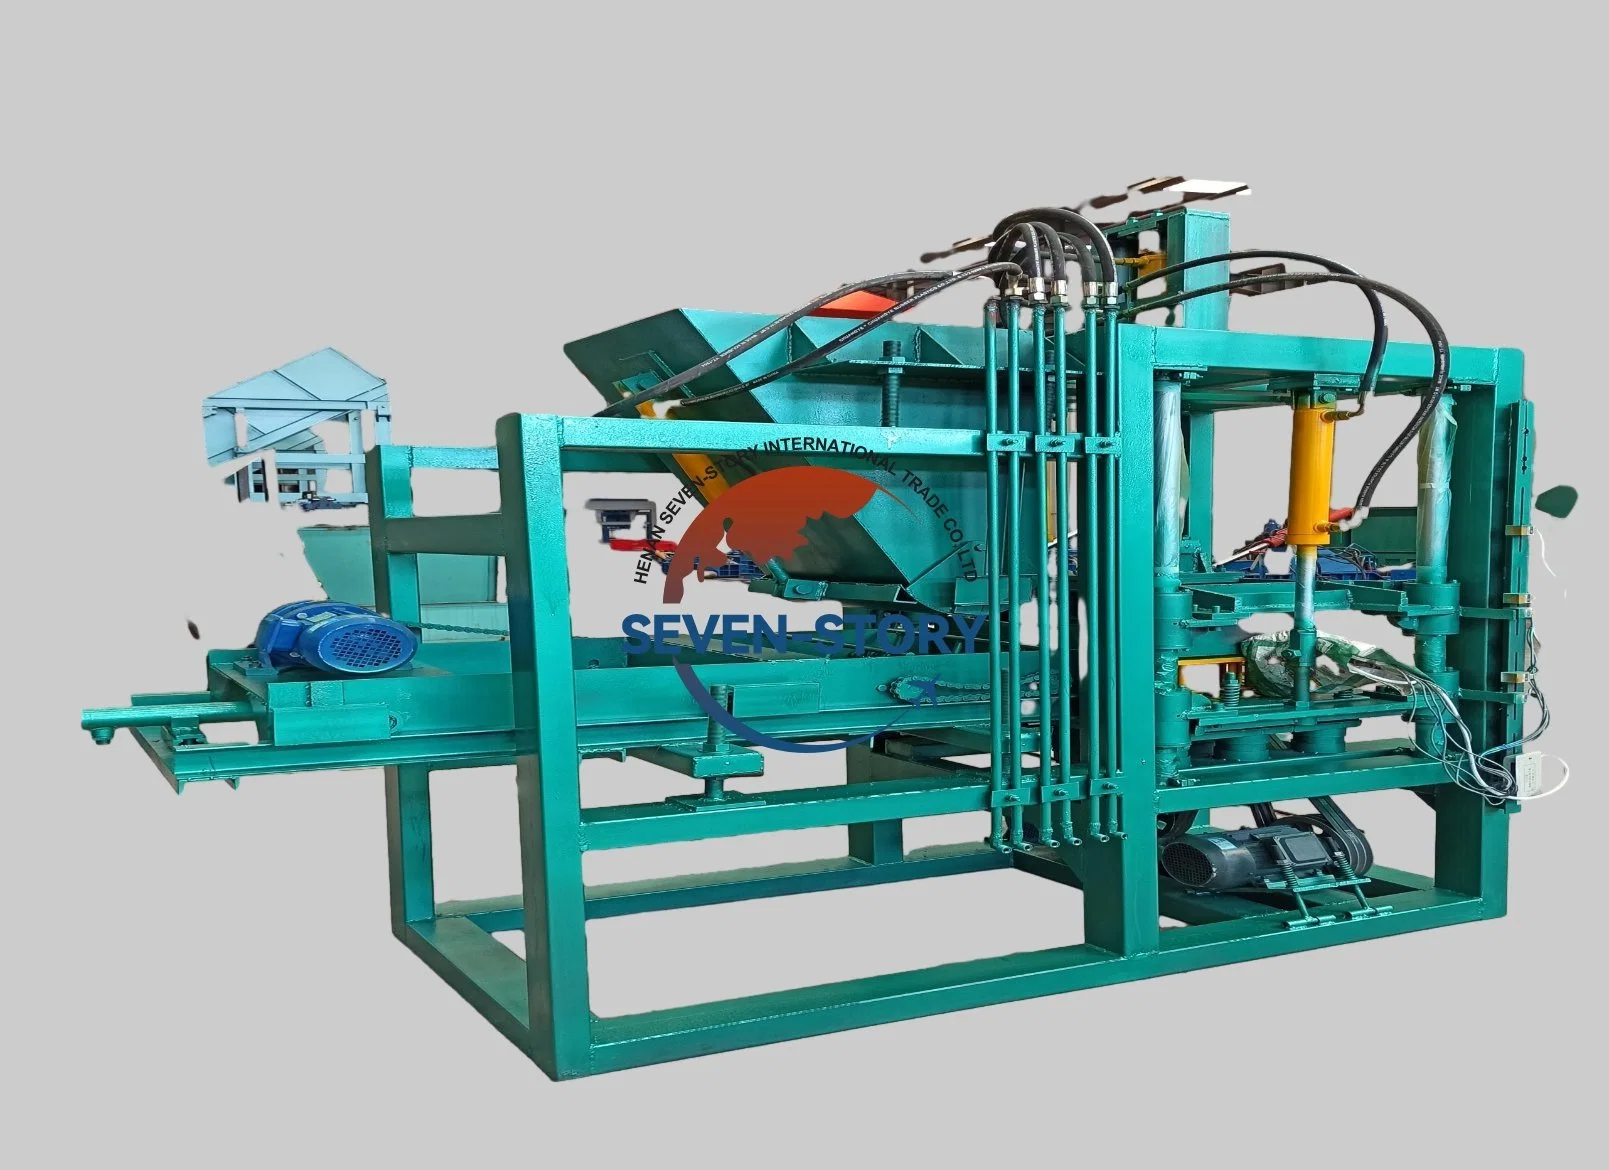 Shipping Safety Regulations for Concrete Block Machine in Brick Making Equipment